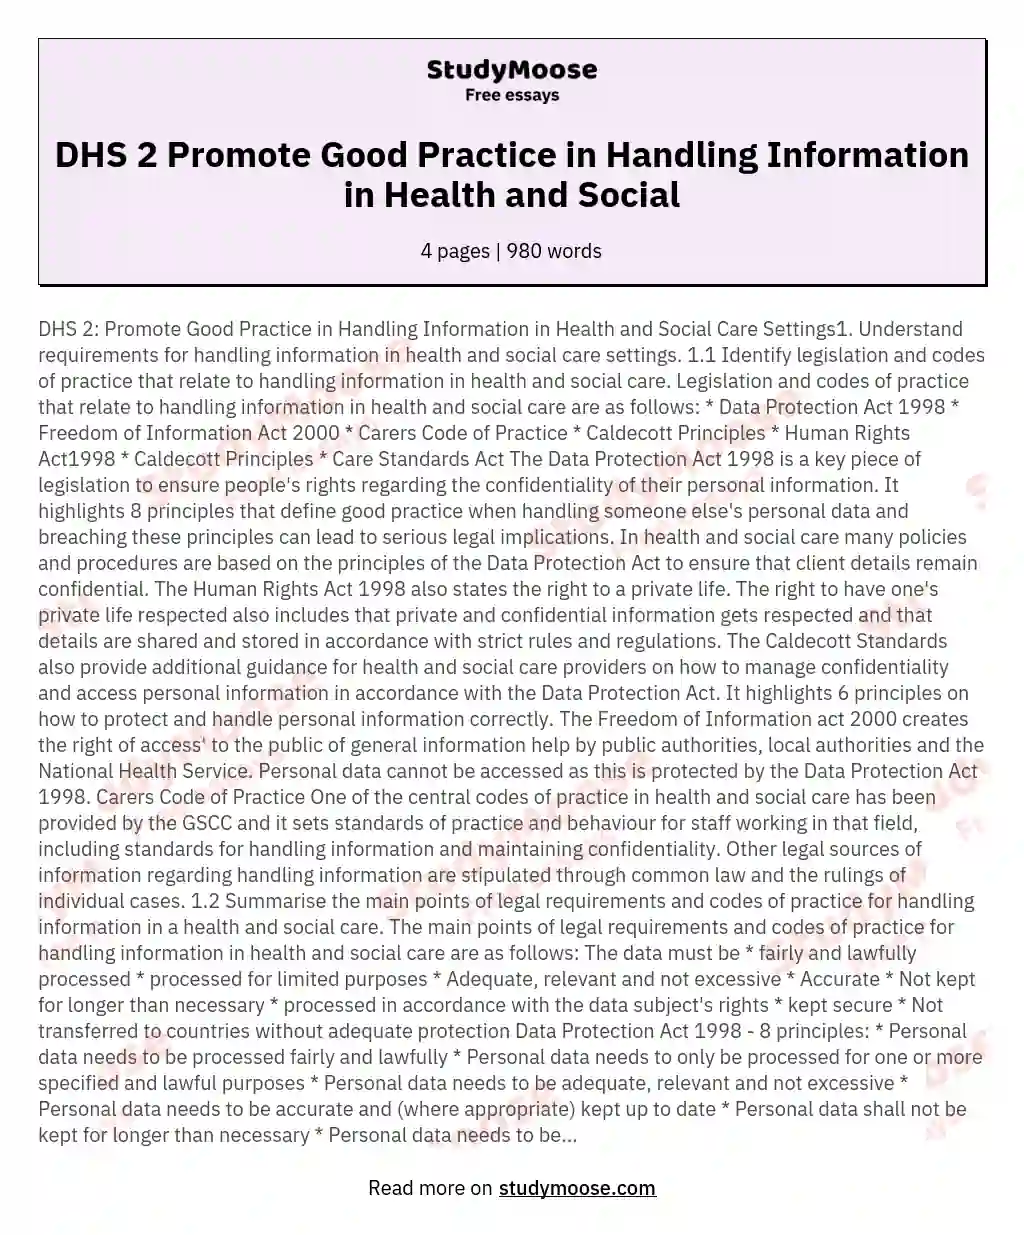 DHS 2 Promote Good Practice in Handling Information in Health and Social